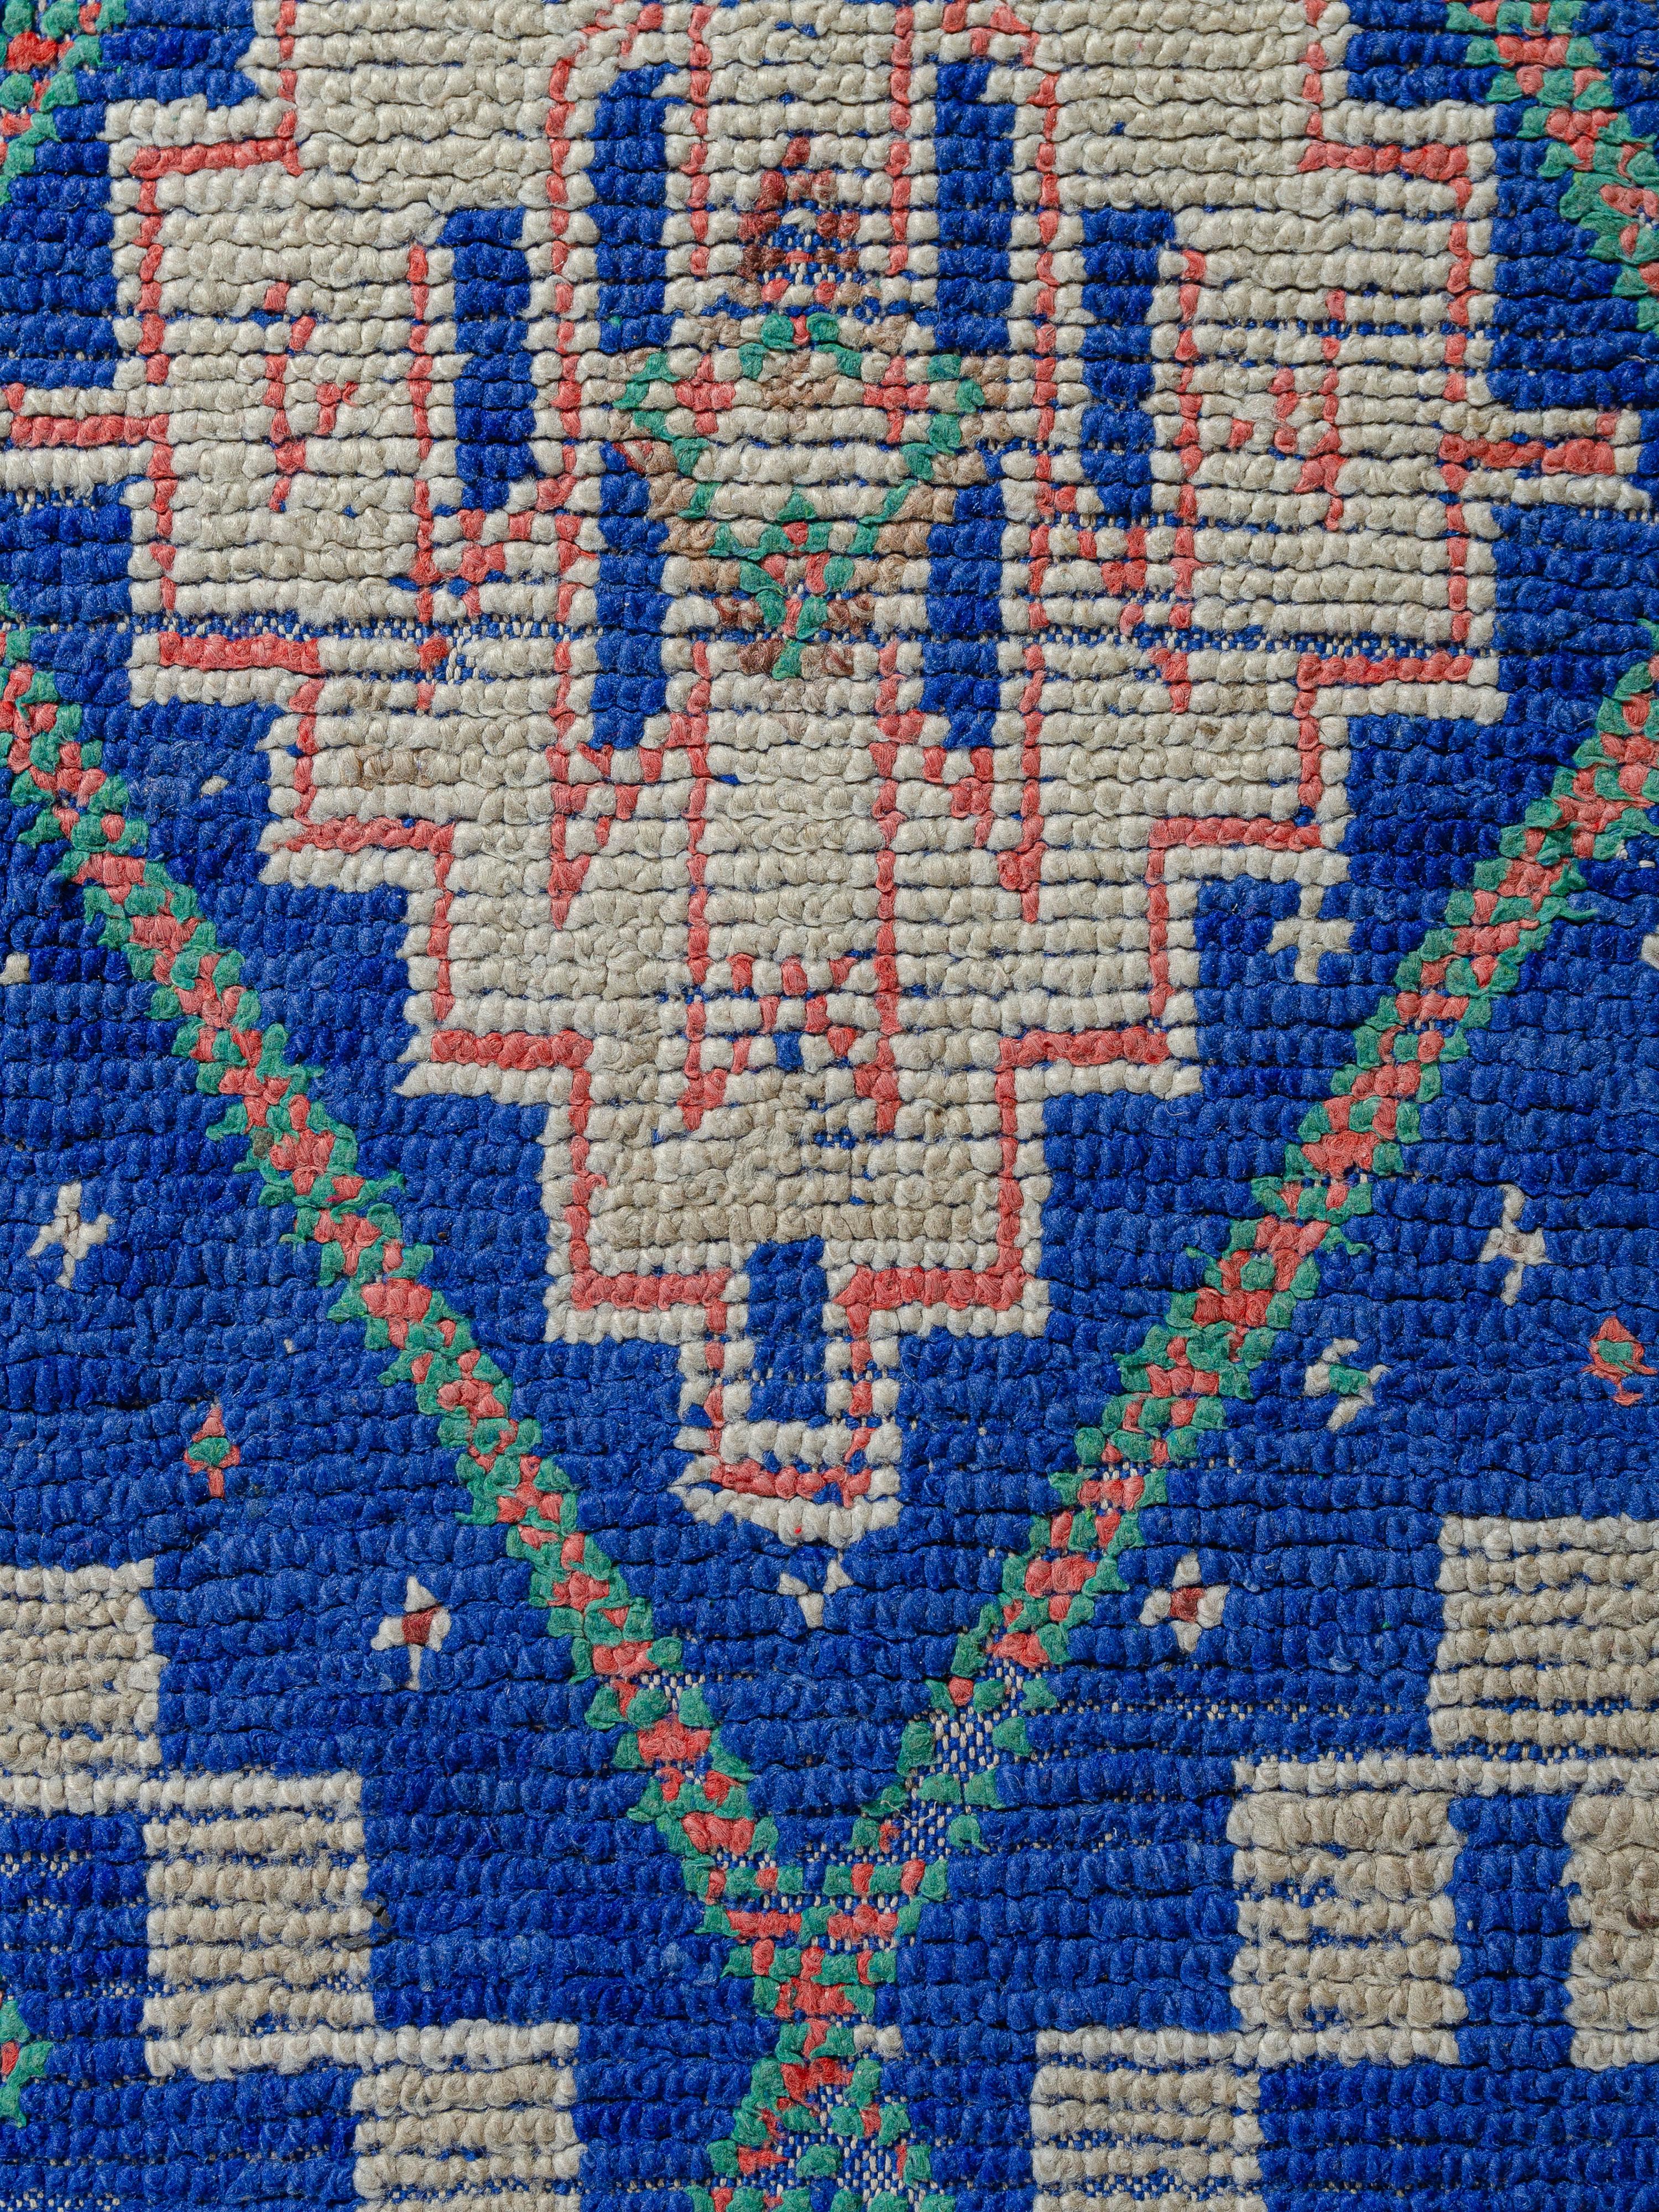 A small yet impactful vintage Beni M’Guild example featuring a stunning cobalt blue ground. The bold graphic motifs surrounding the central lozenge network are knotted in contrasting mint green, coral red, and ivory. Intricate side borders are